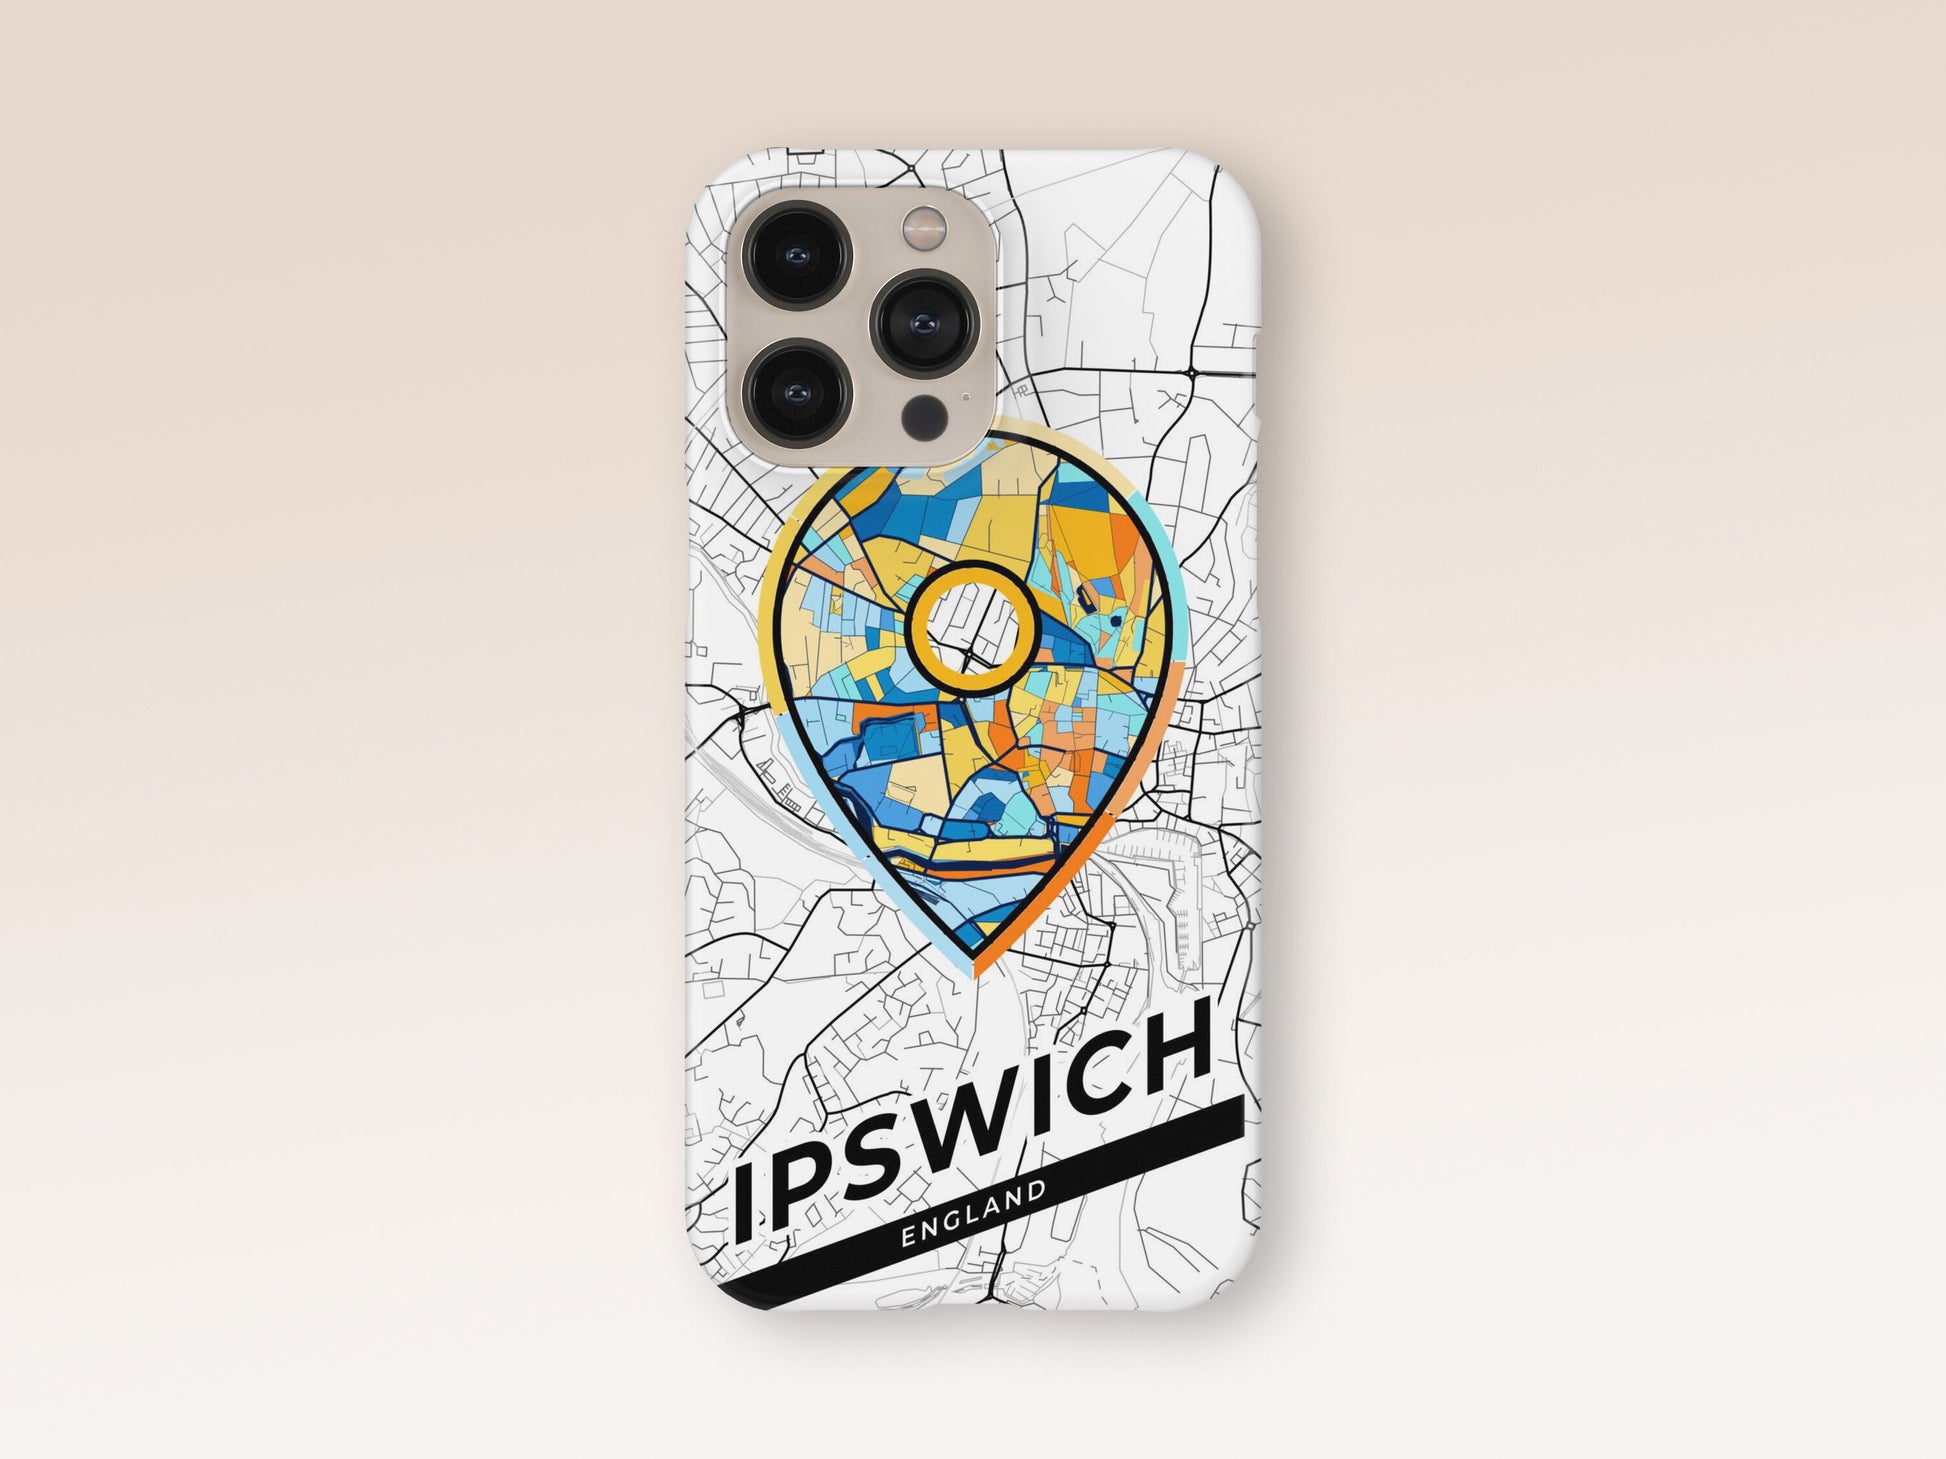 Ipswich England slim phone case with colorful icon. Birthday, wedding or housewarming gift. Couple match cases. 1